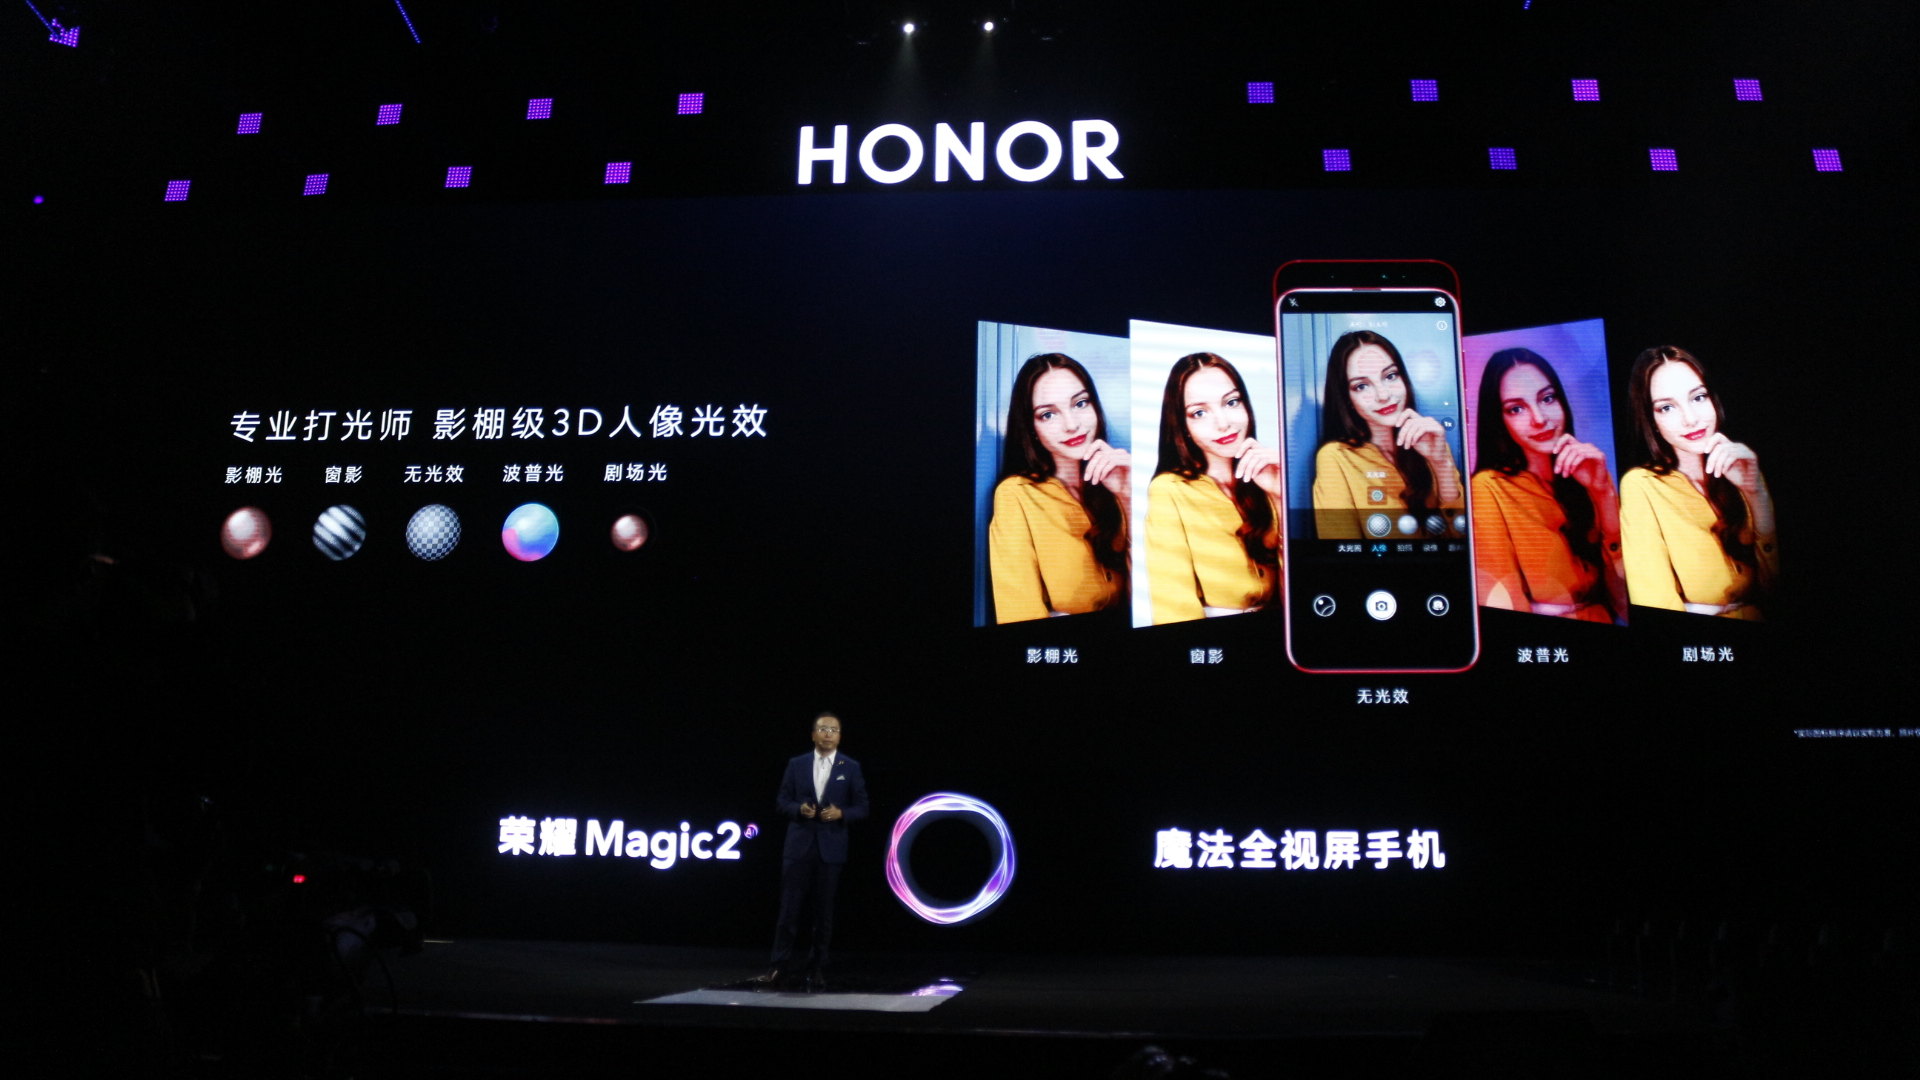 The Honor Magic 2 launch event.